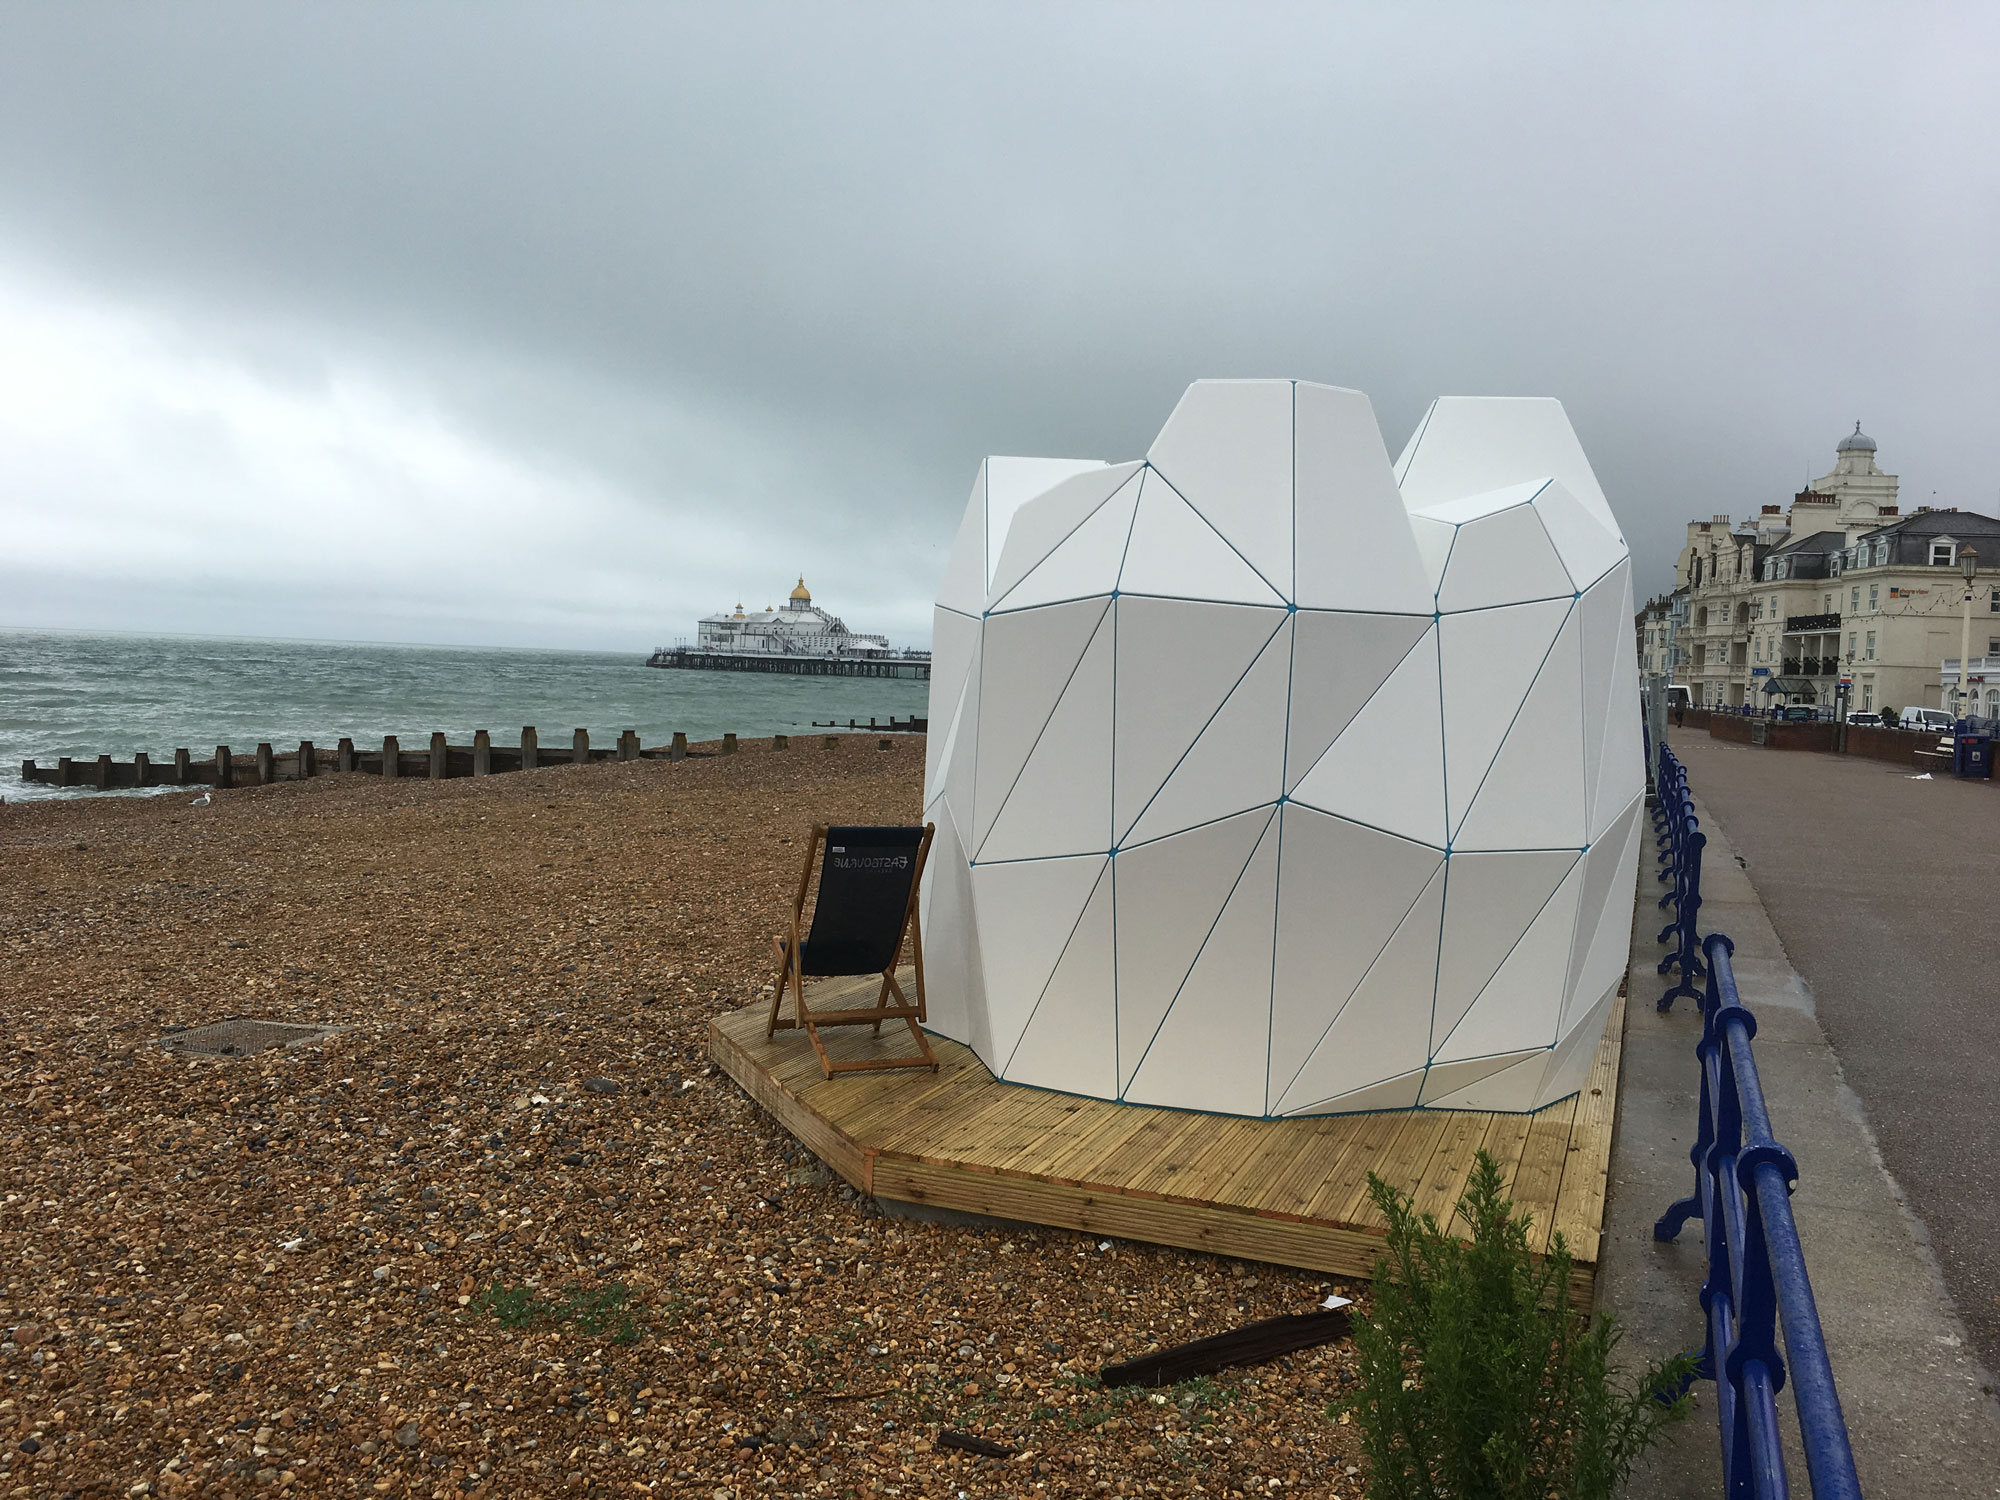 Stephen Foley - 'What un-earthed' Beach Hut (Eastbourne)